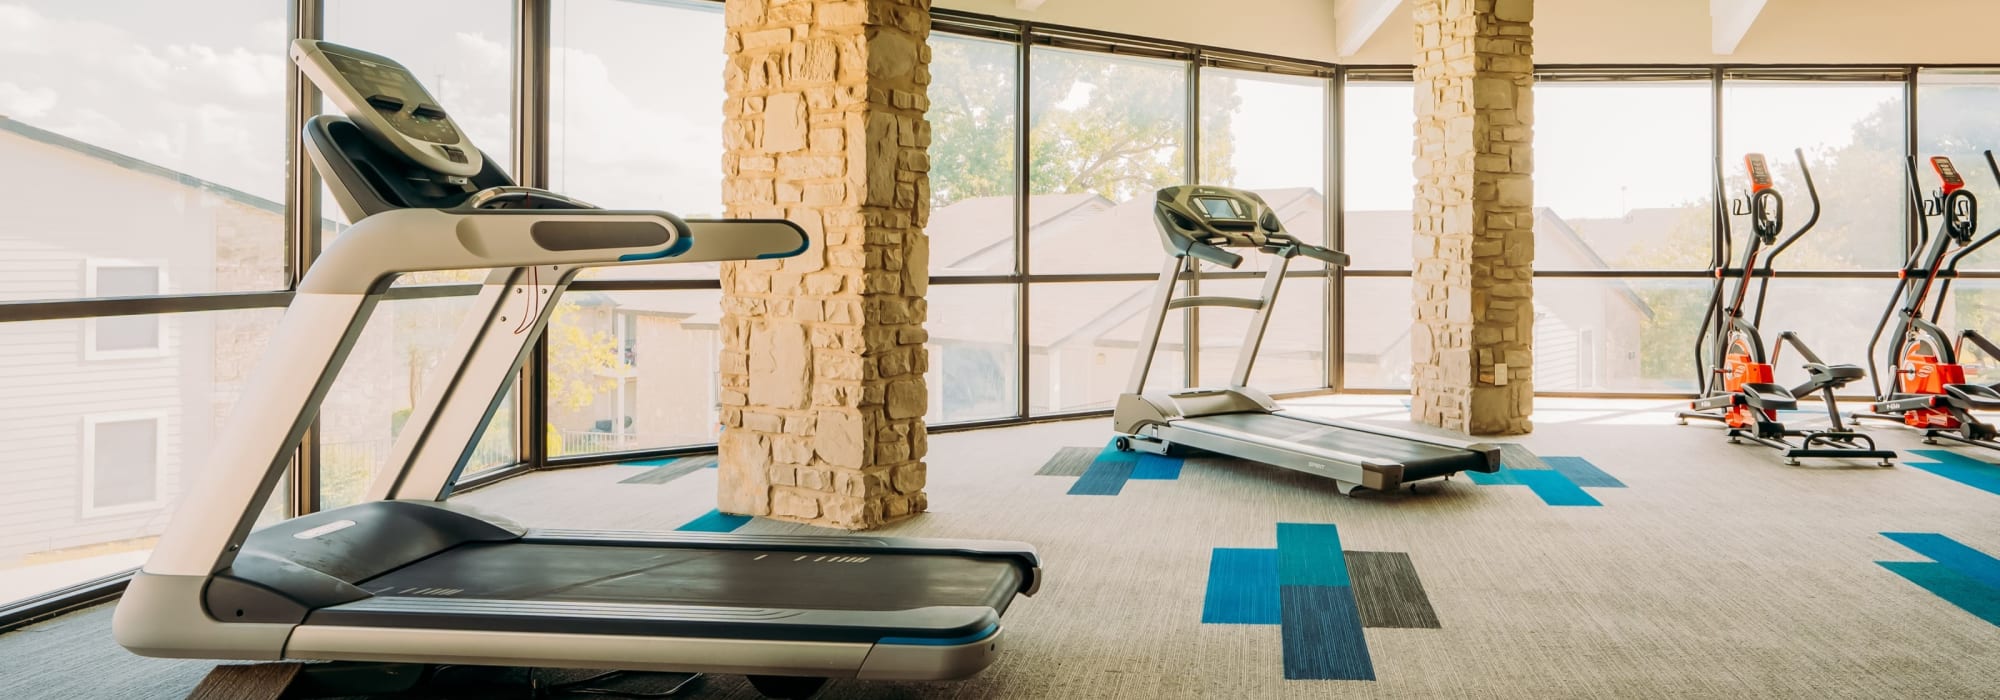 Onsite fitness center at Pearl Park in San Antonio, Texas